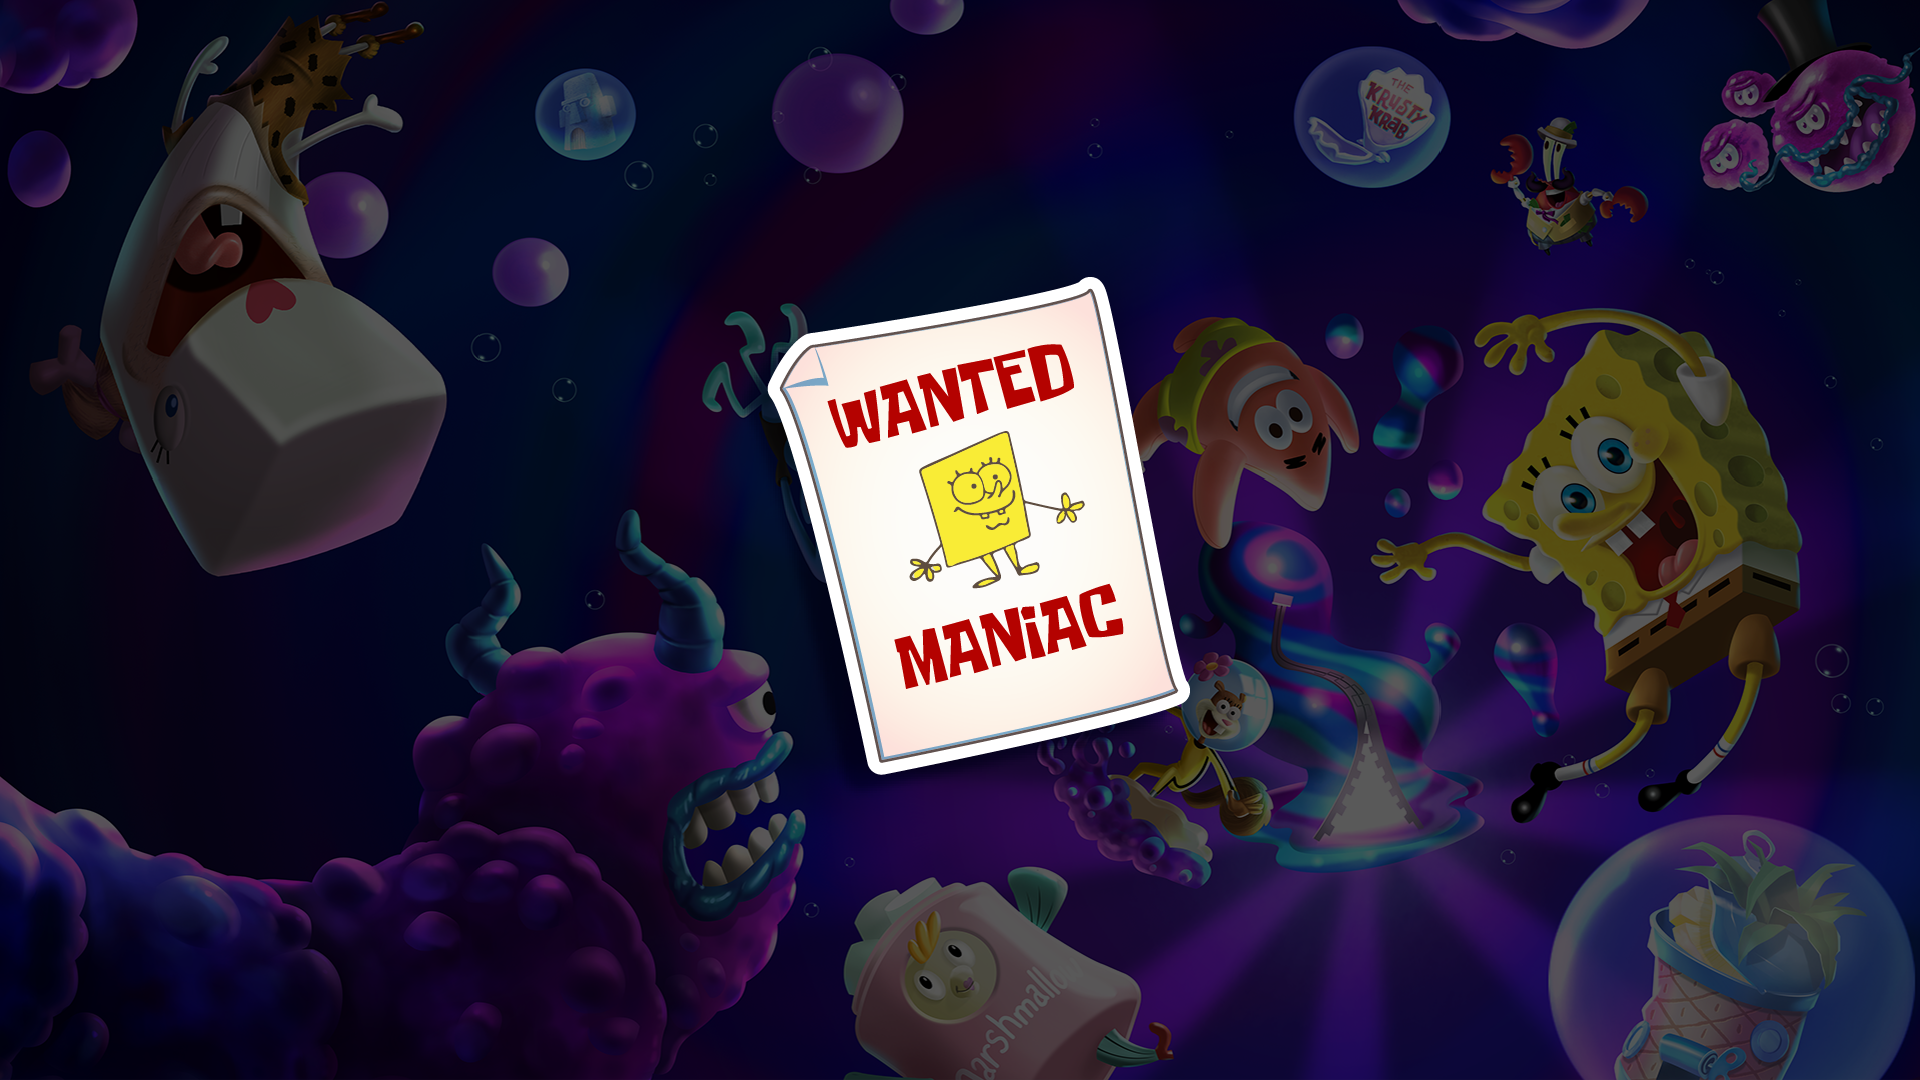 Icon for Wanted Sponge